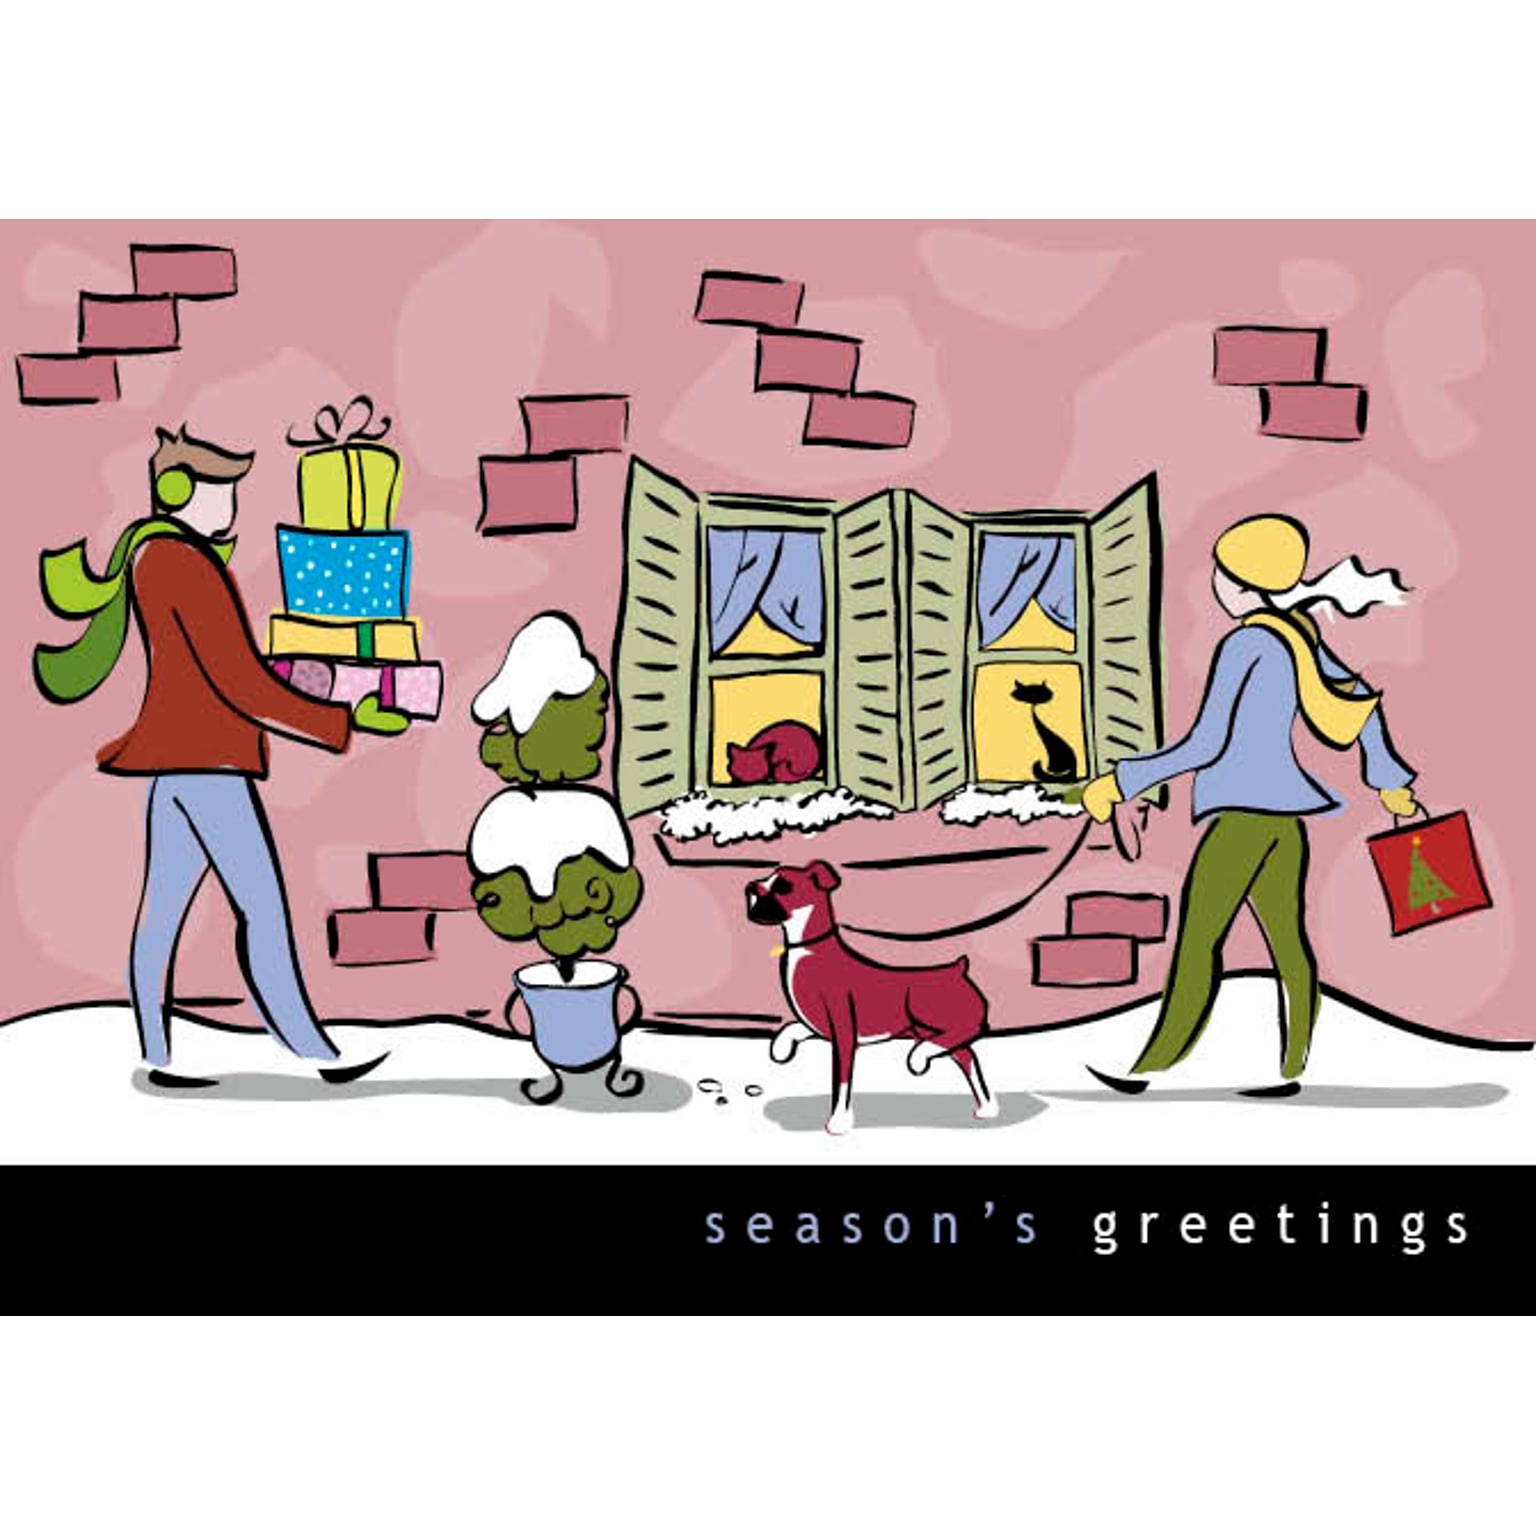 Seasons Greetings Presents And Pets Holiday Greeting Cards, With A7 Envelopes, 7 x 5, 25 Cards per Set